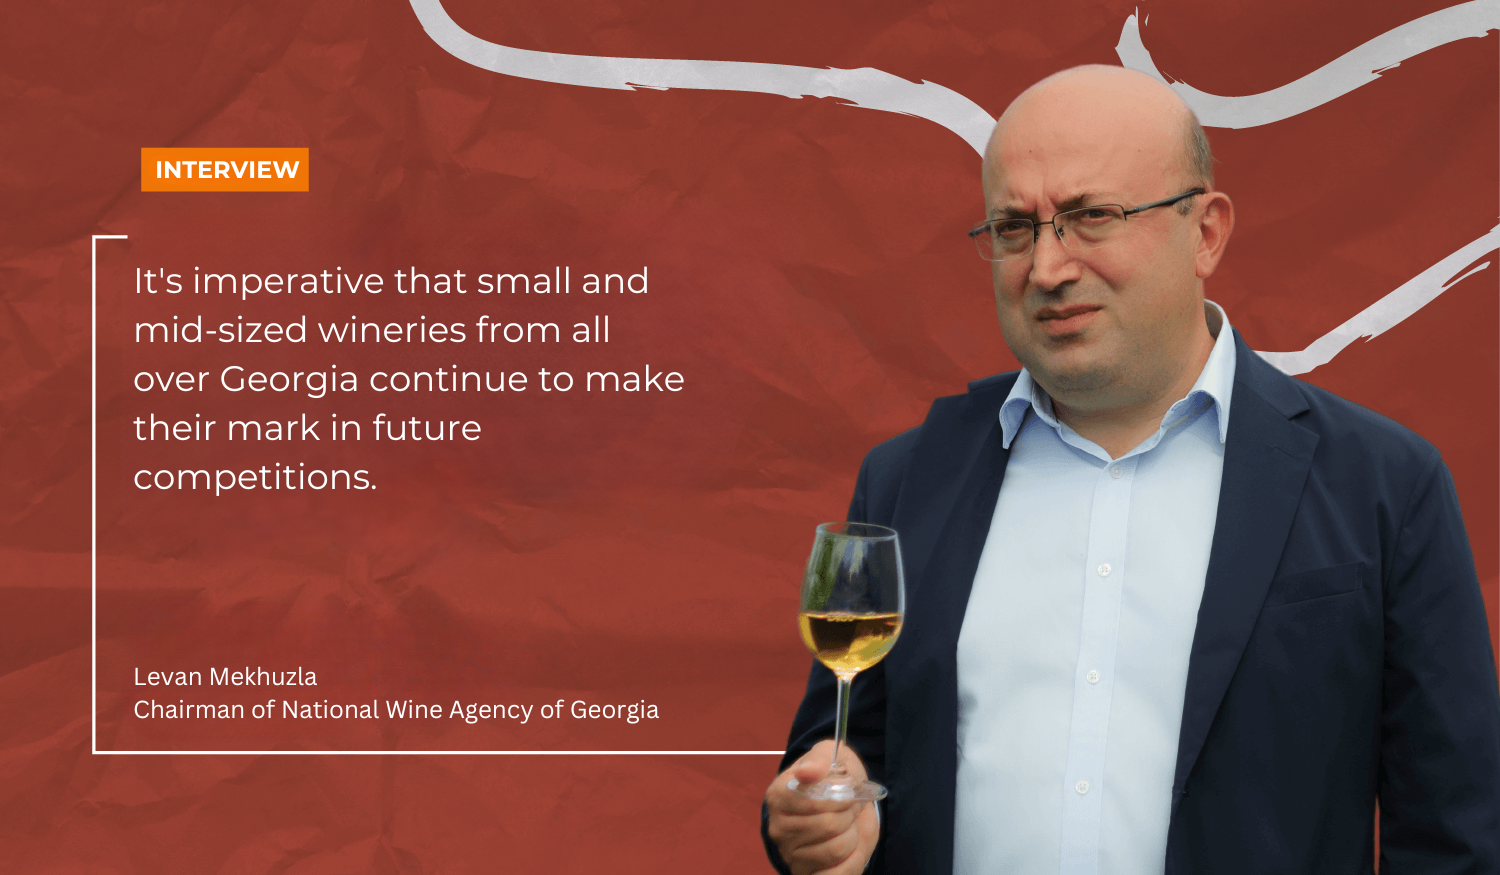 Levan Mekhuzla on IWSC: A Platform for Winemakers to Elevate Their Brand